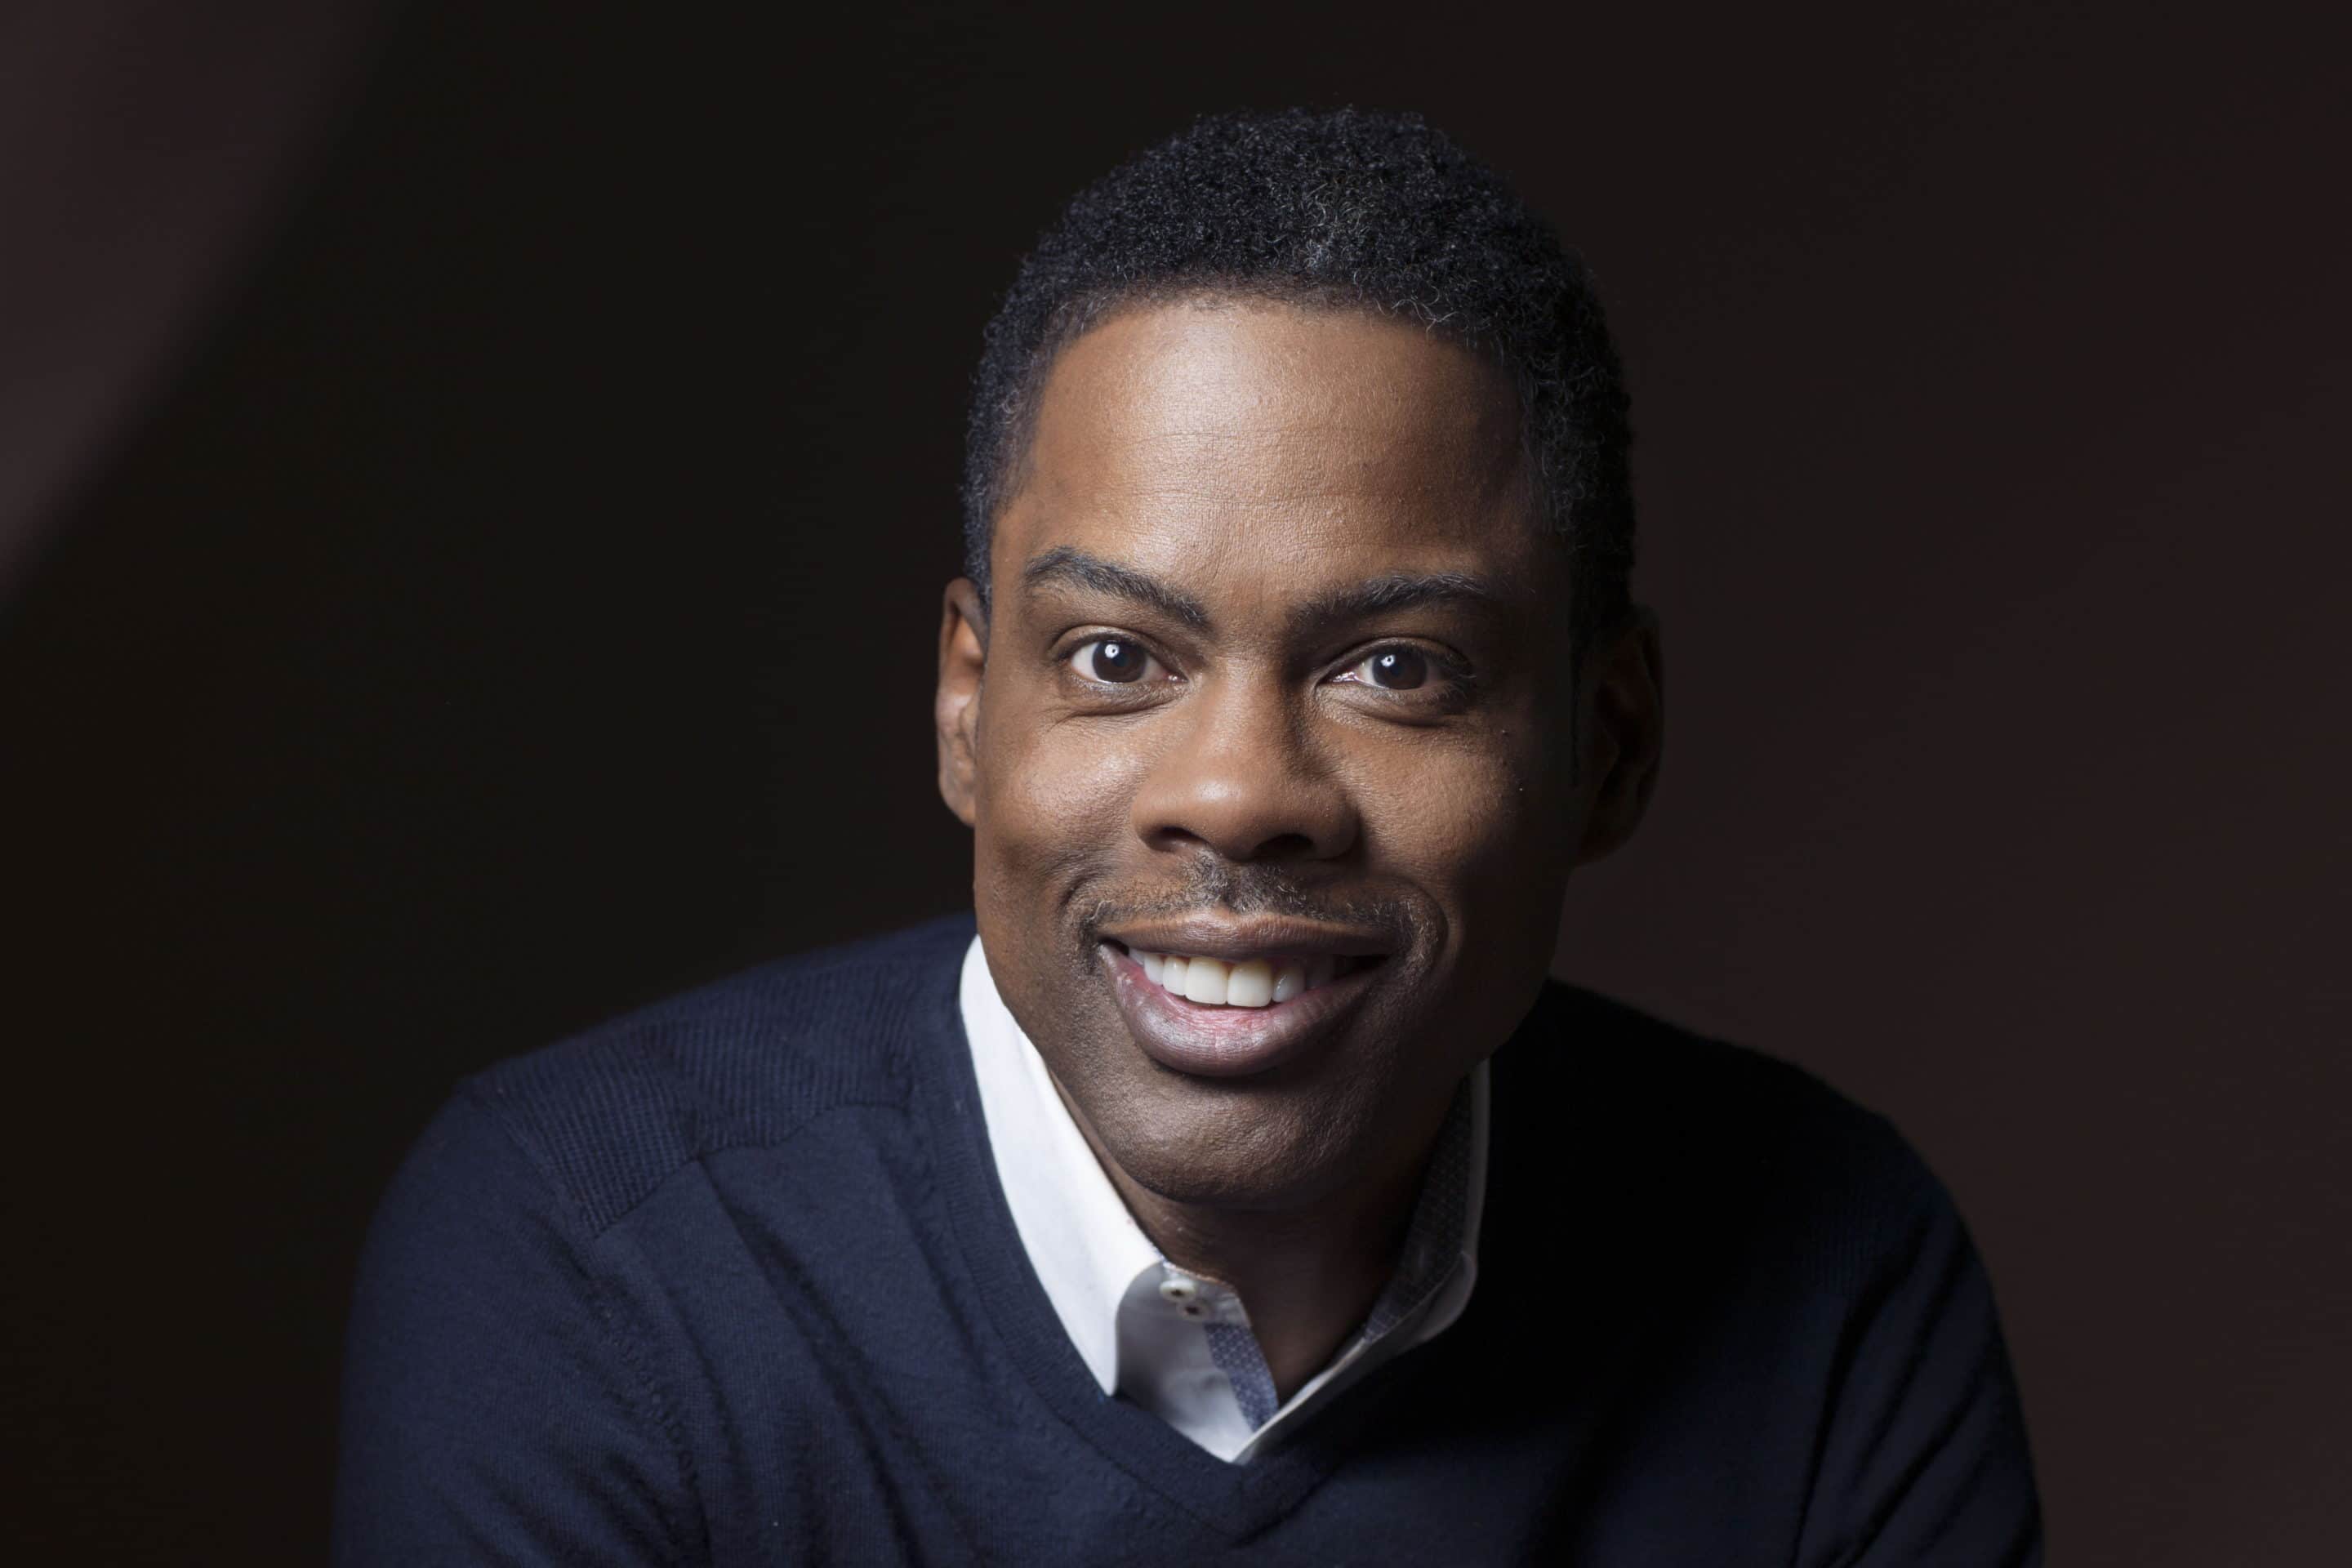 Most Fascinating People of 2016 – Chris Rock